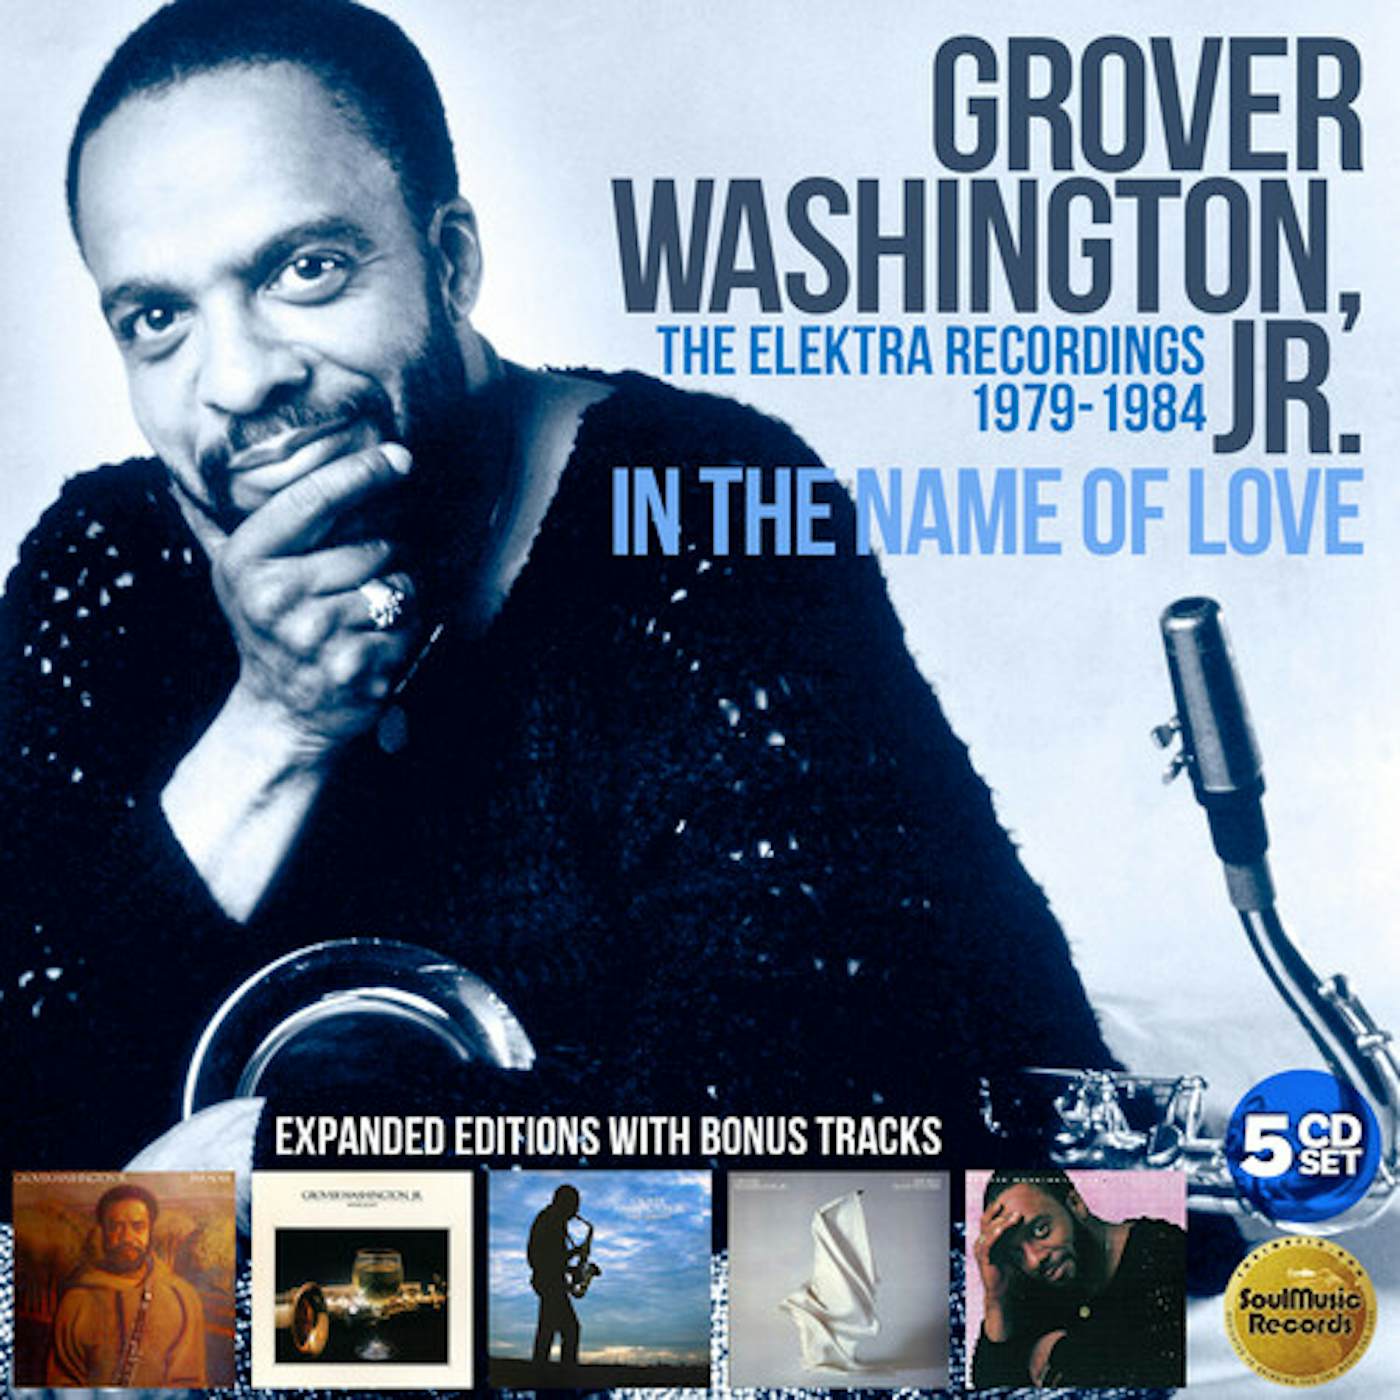 Grover Washington, Jr. IN THE NAME OF LOVE: THE ELEKTRA YEARS 1979-1984 CD